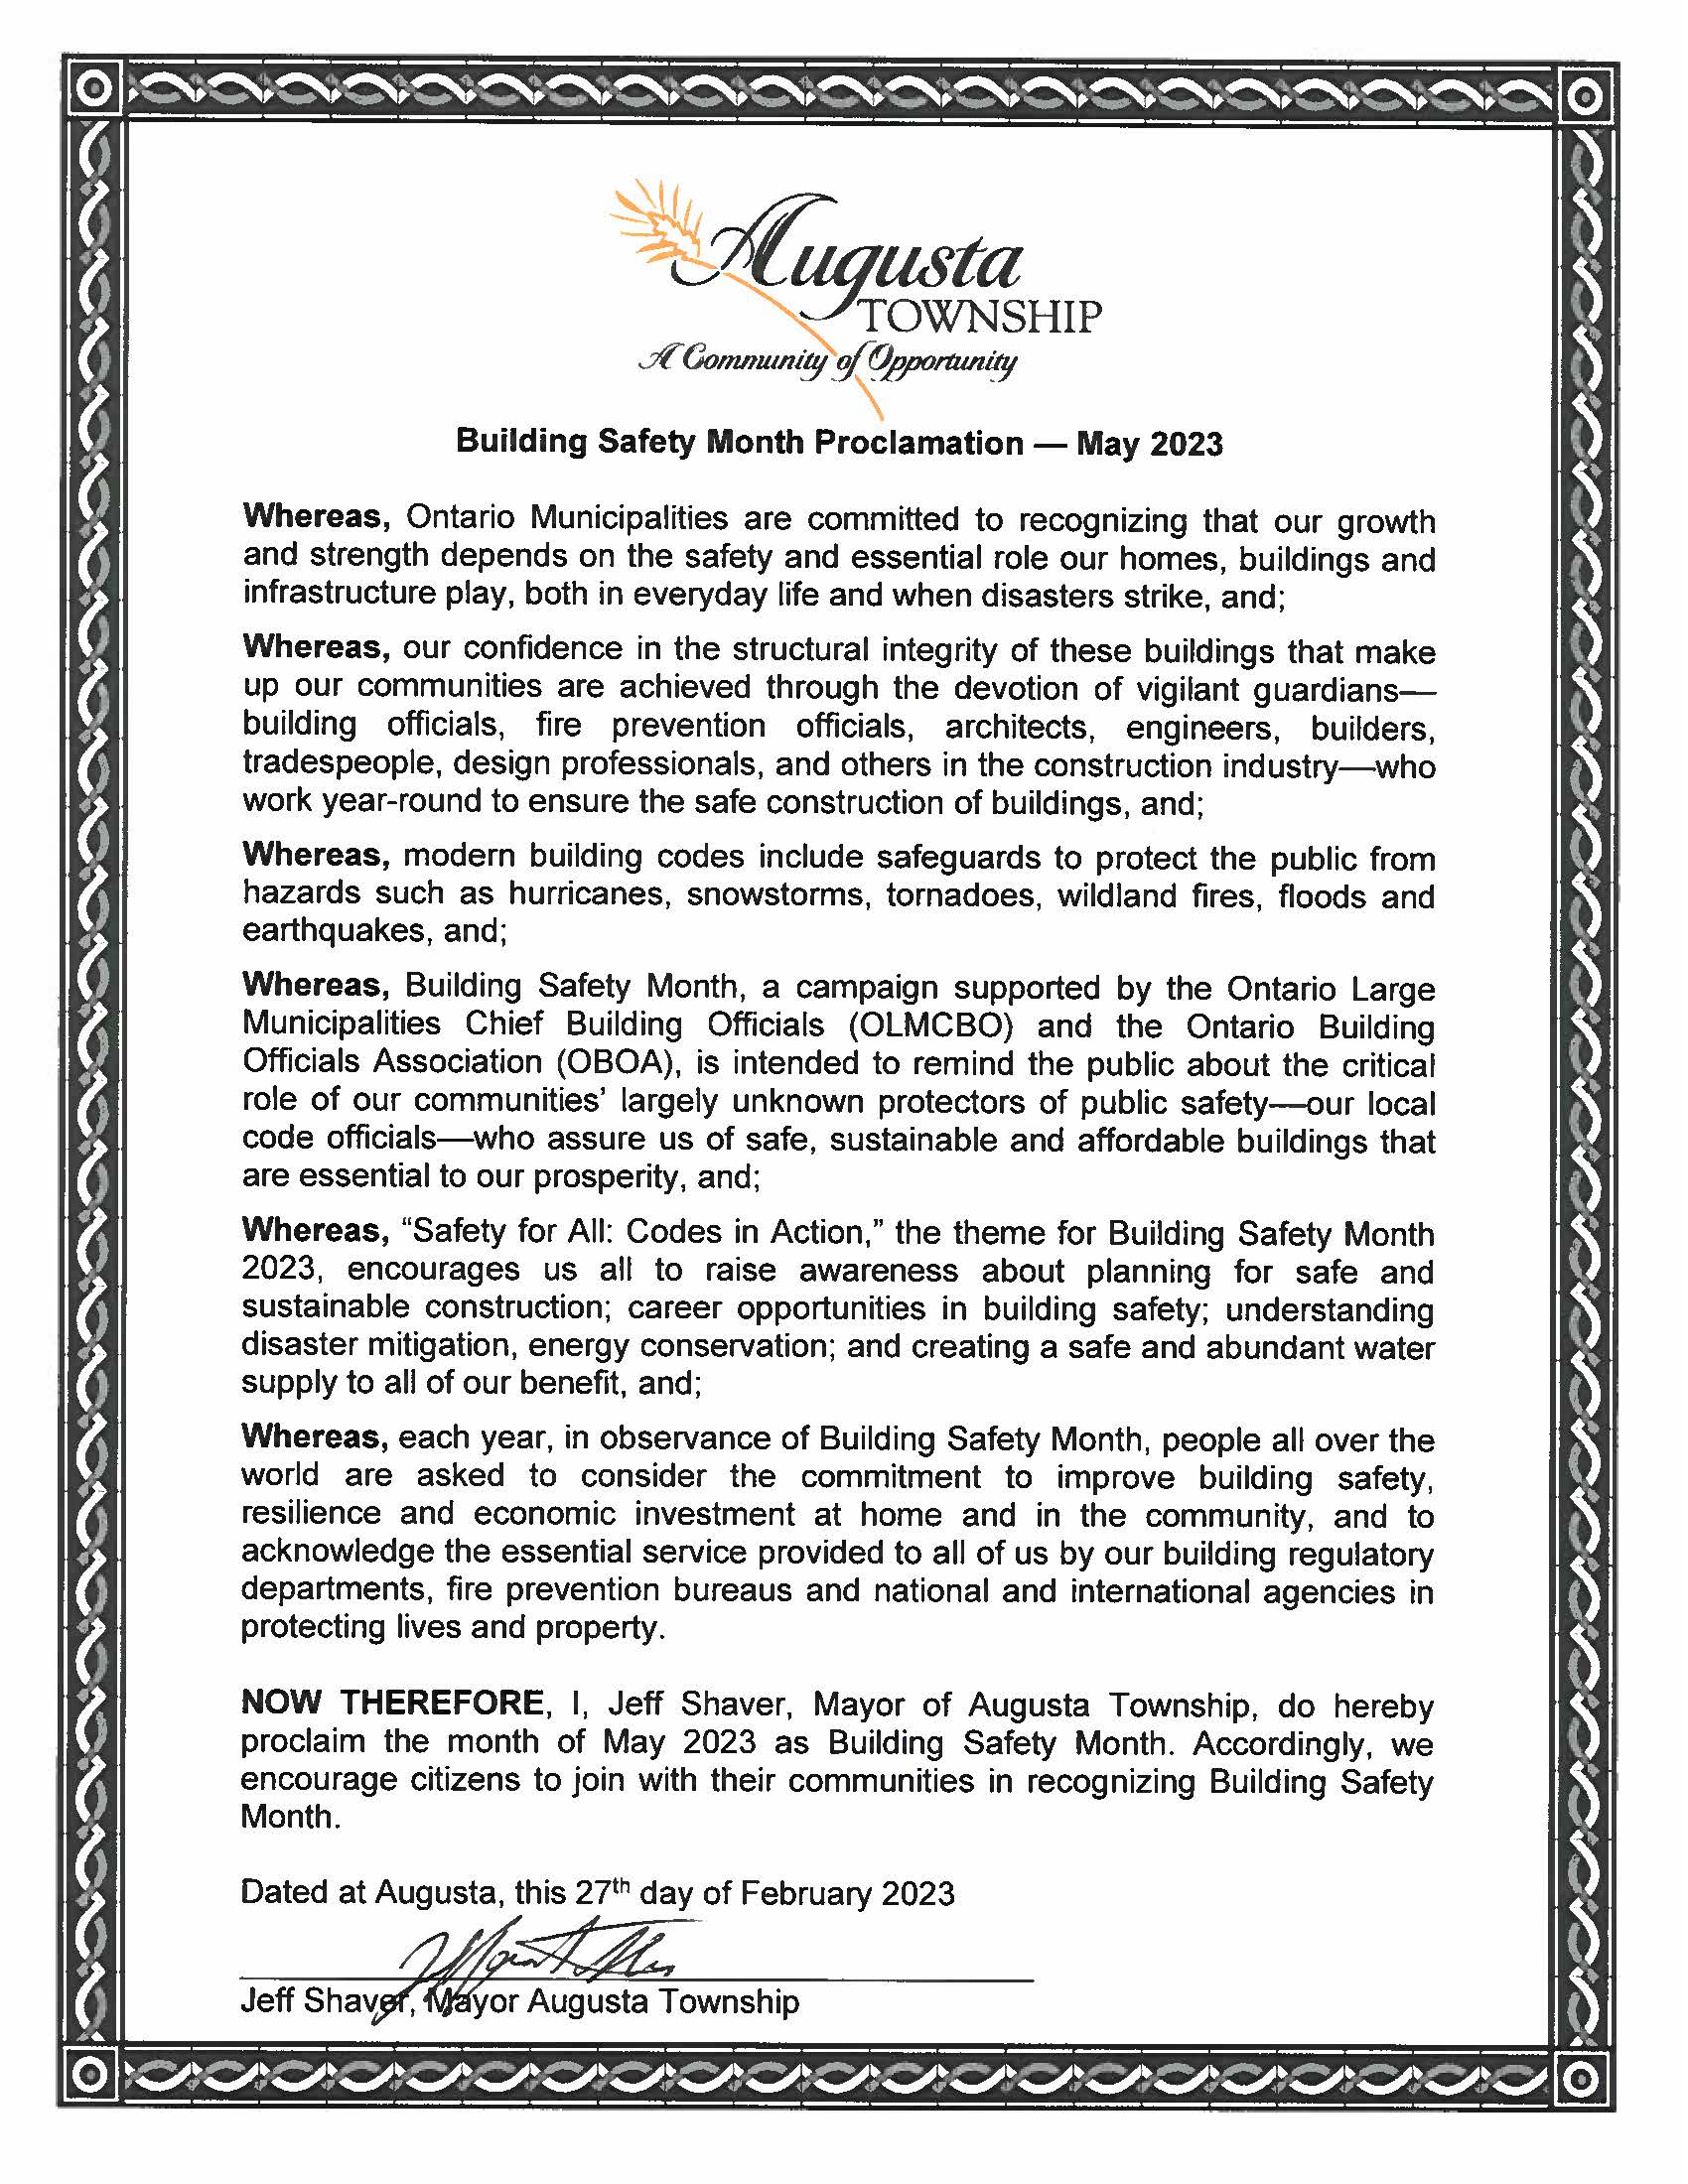 building safety month is may 2023 proclamation